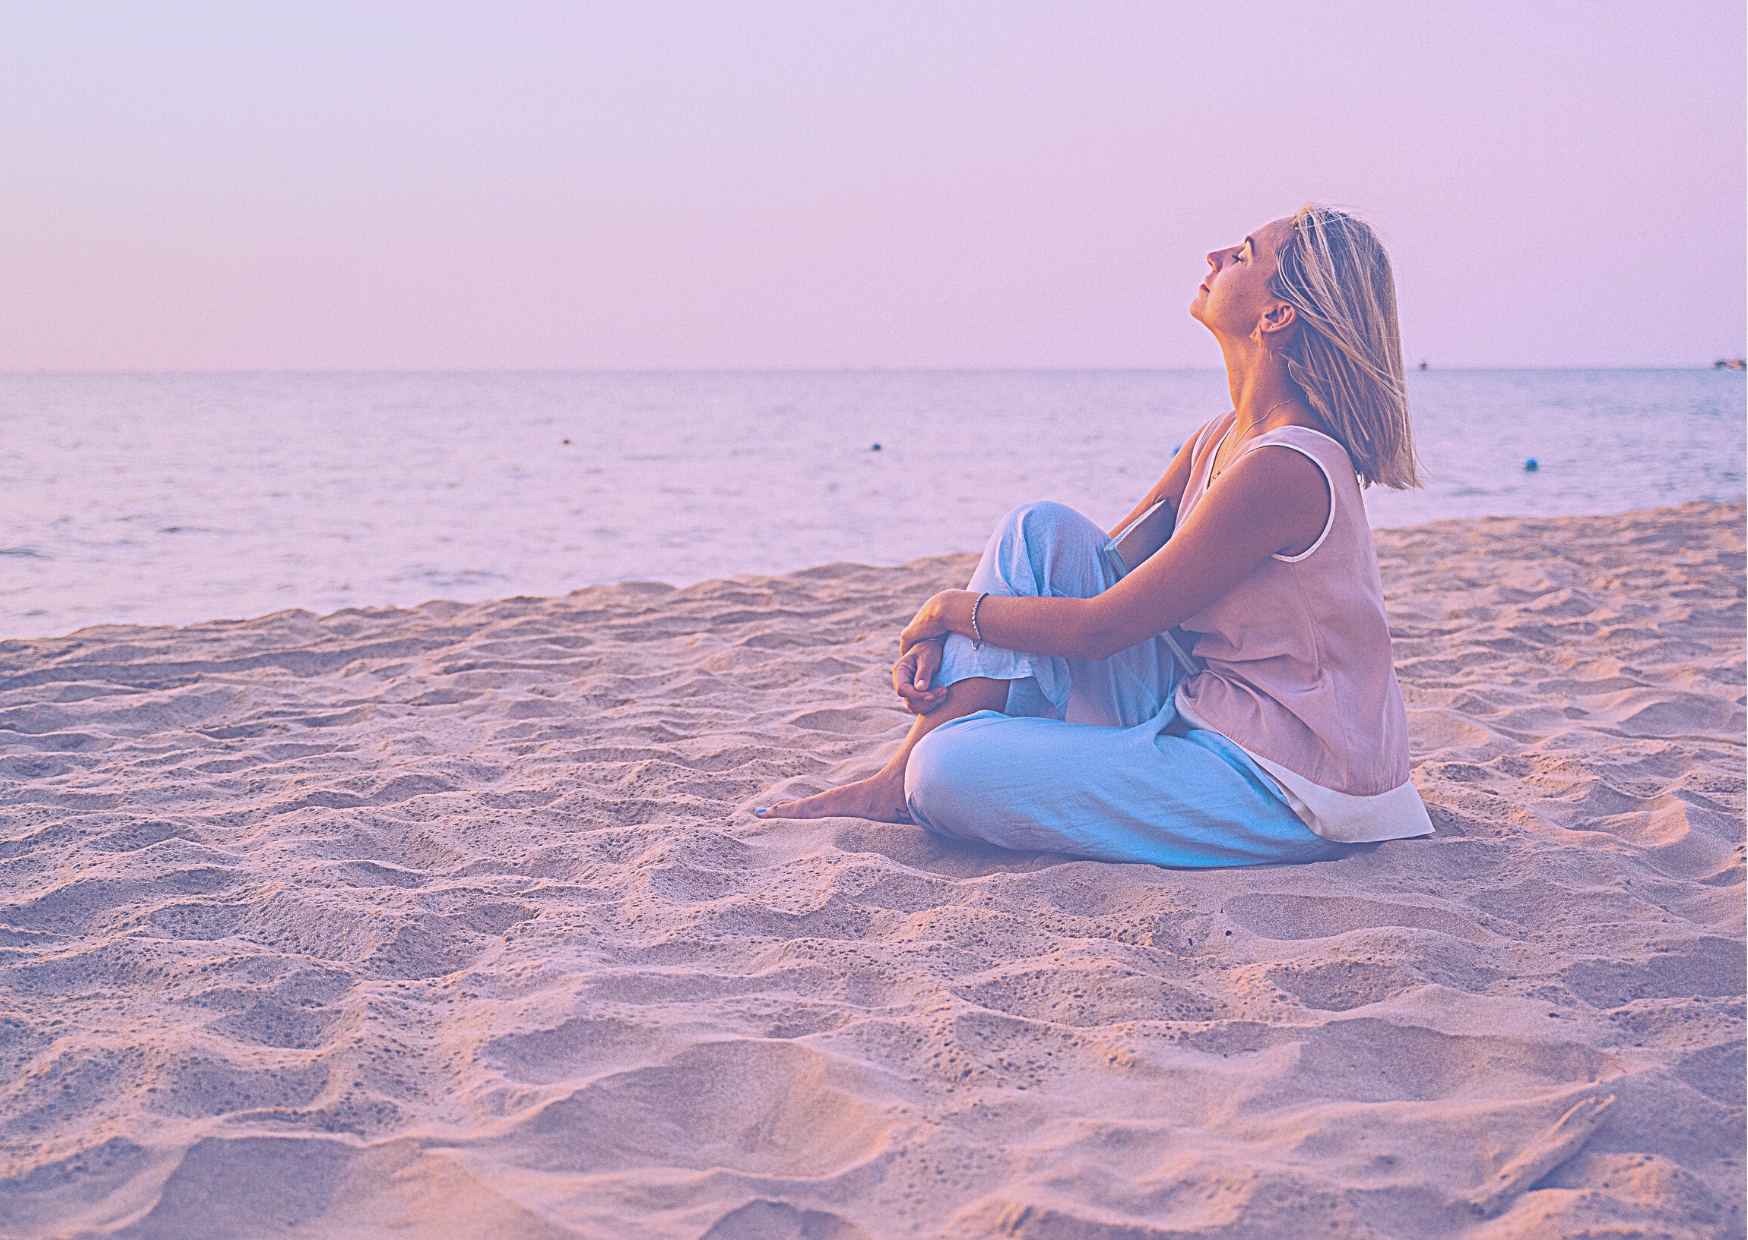 What to think about during meditation